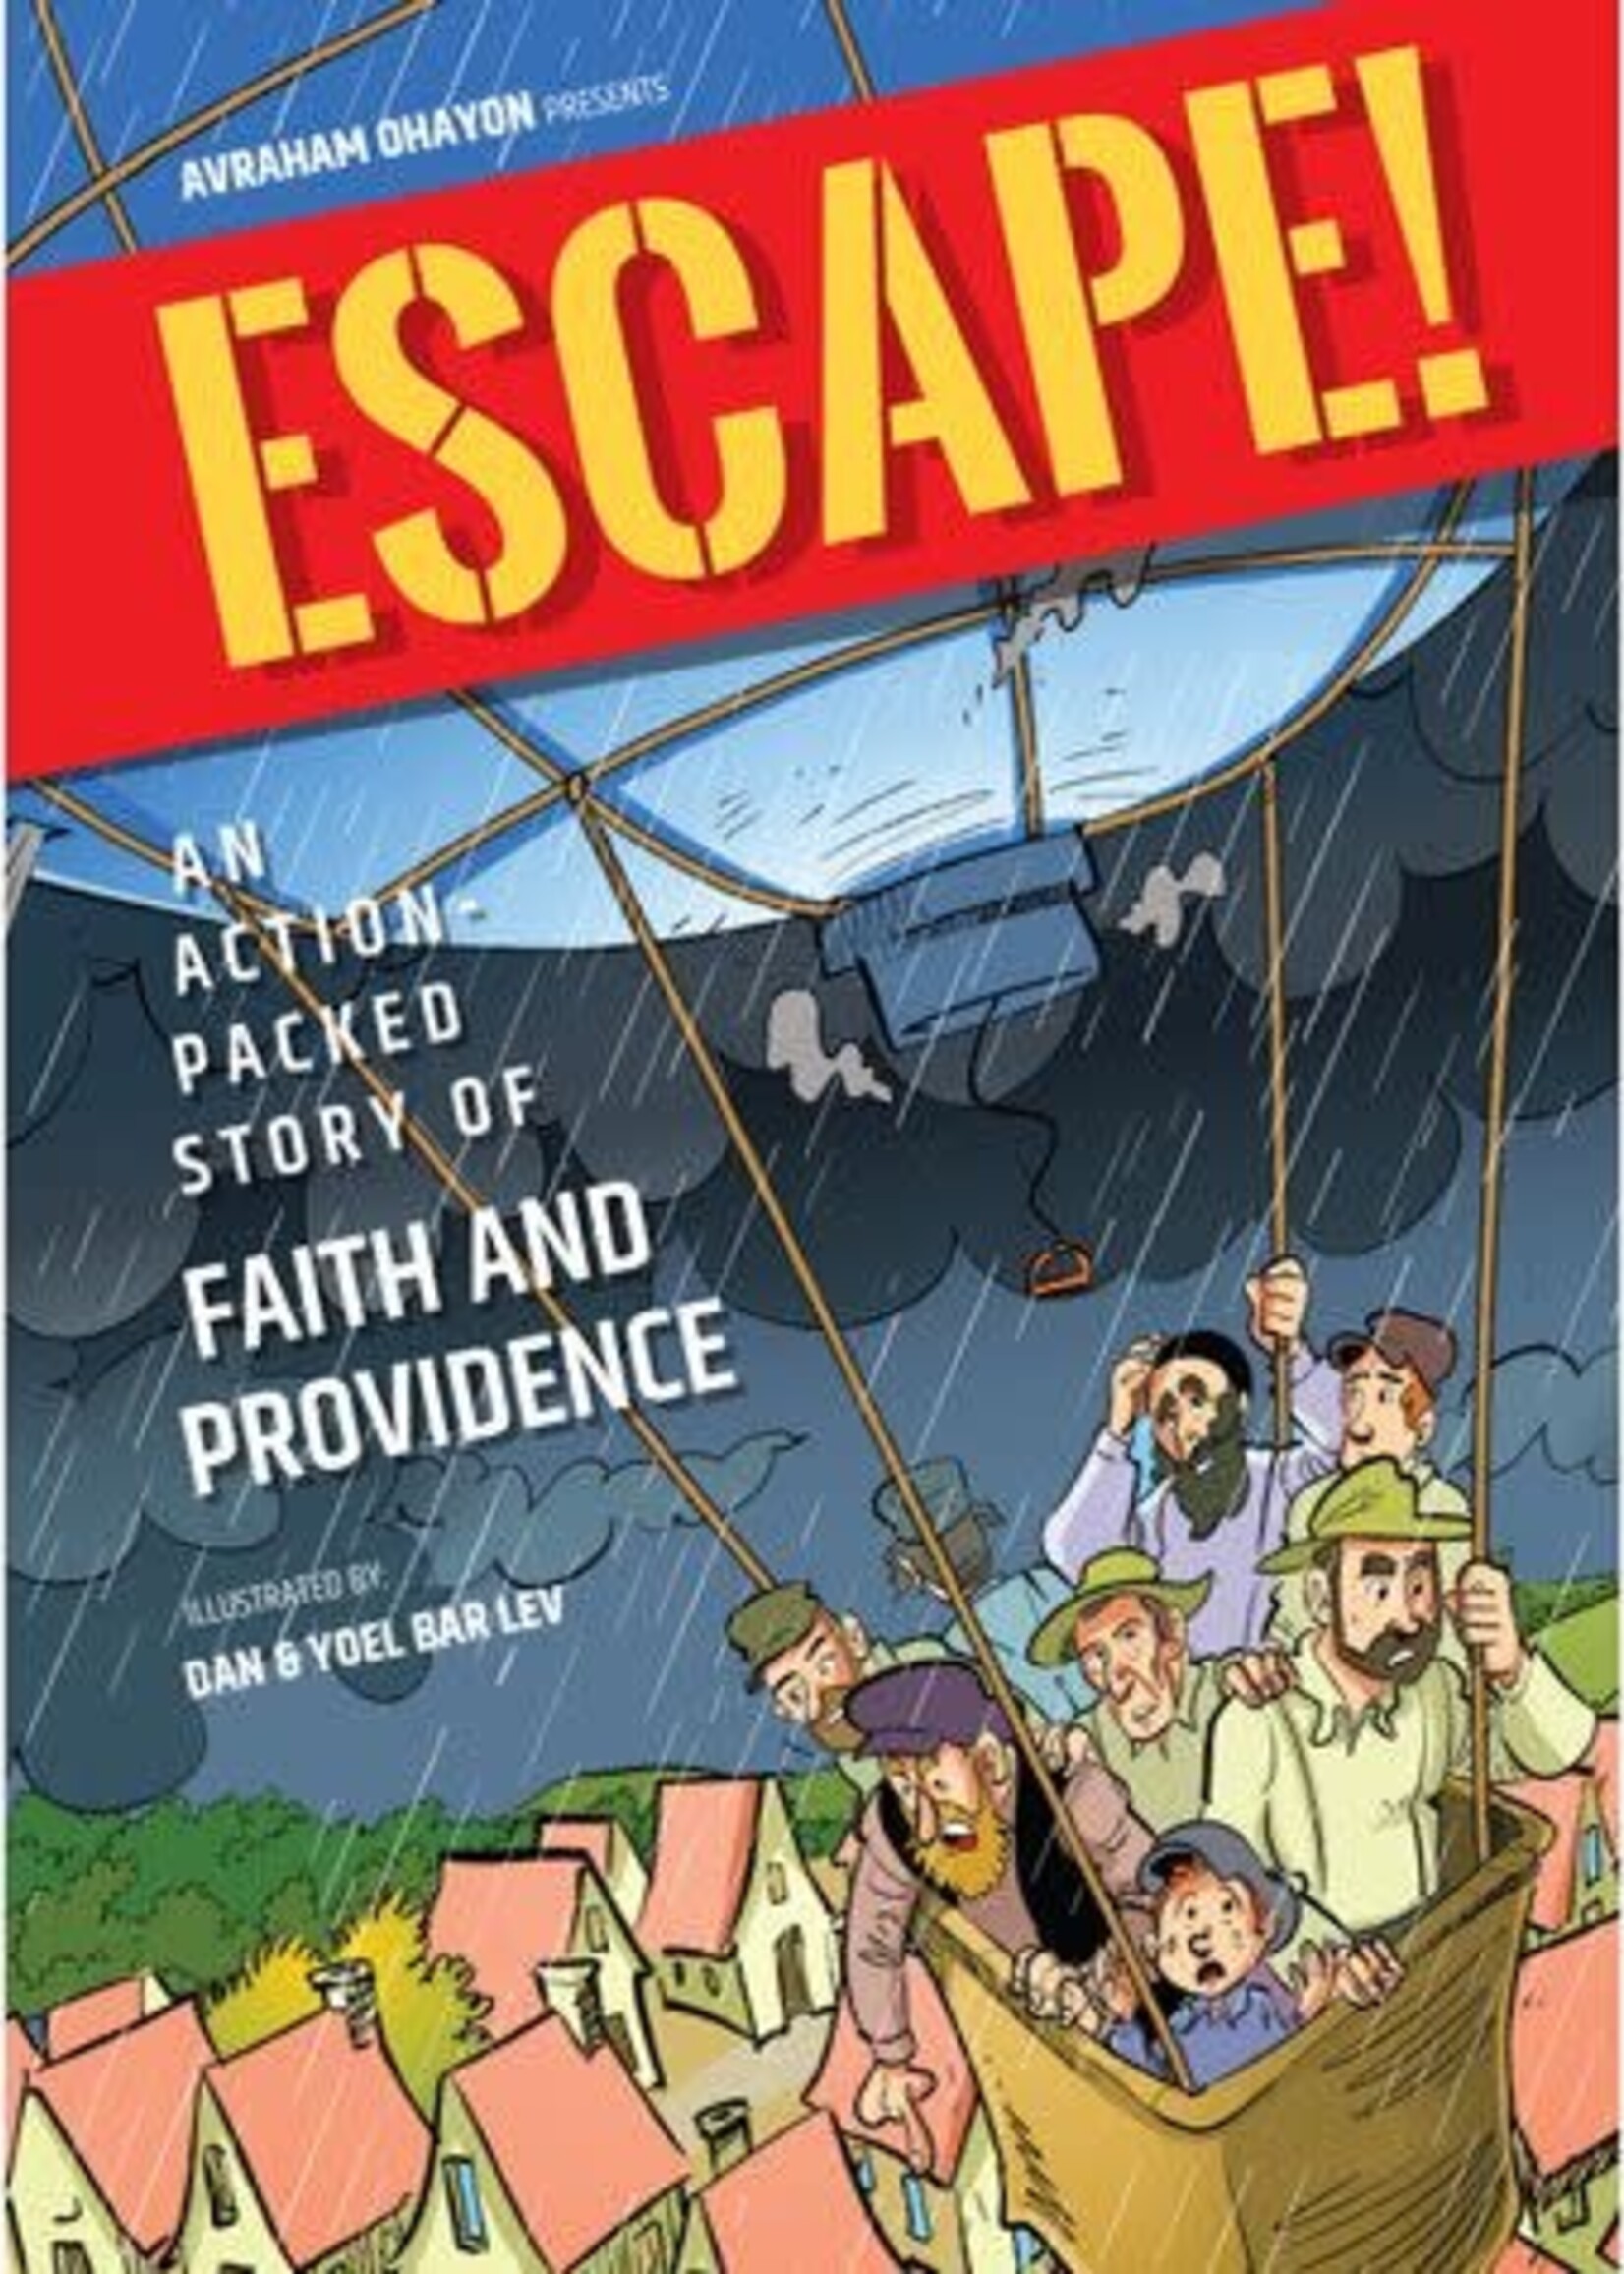 Avraham Ohayon Escape! AN ACTION PACKED STORY OF FAITH AND PROVIDENCE